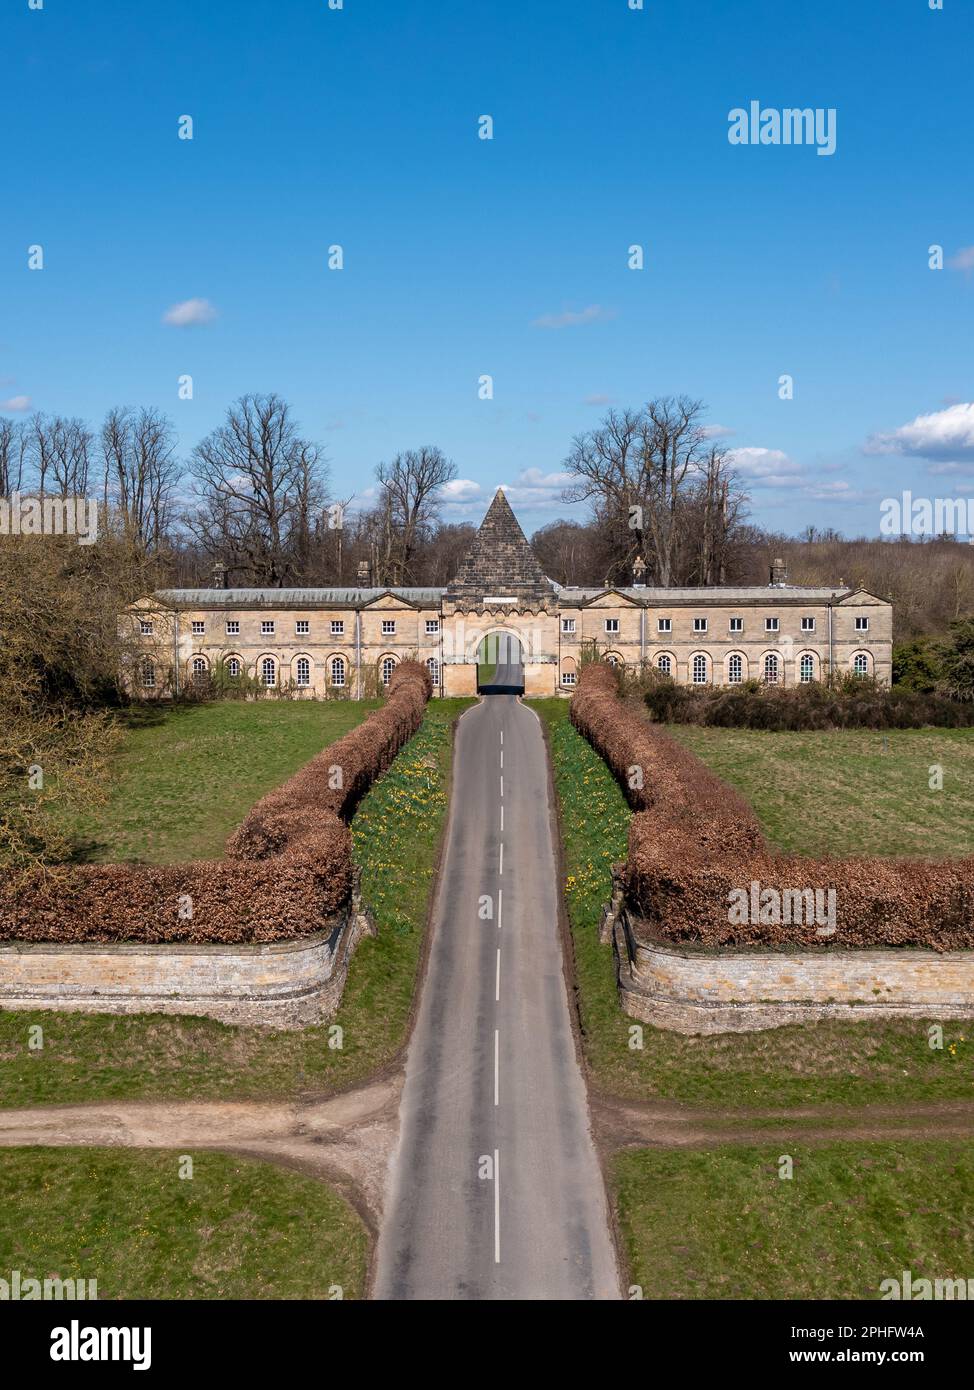 An aerial view of the Pyramid Gatehouse  building on the North Yorkshire  Castle Howard estate in the Howardian Hills Stock Photo